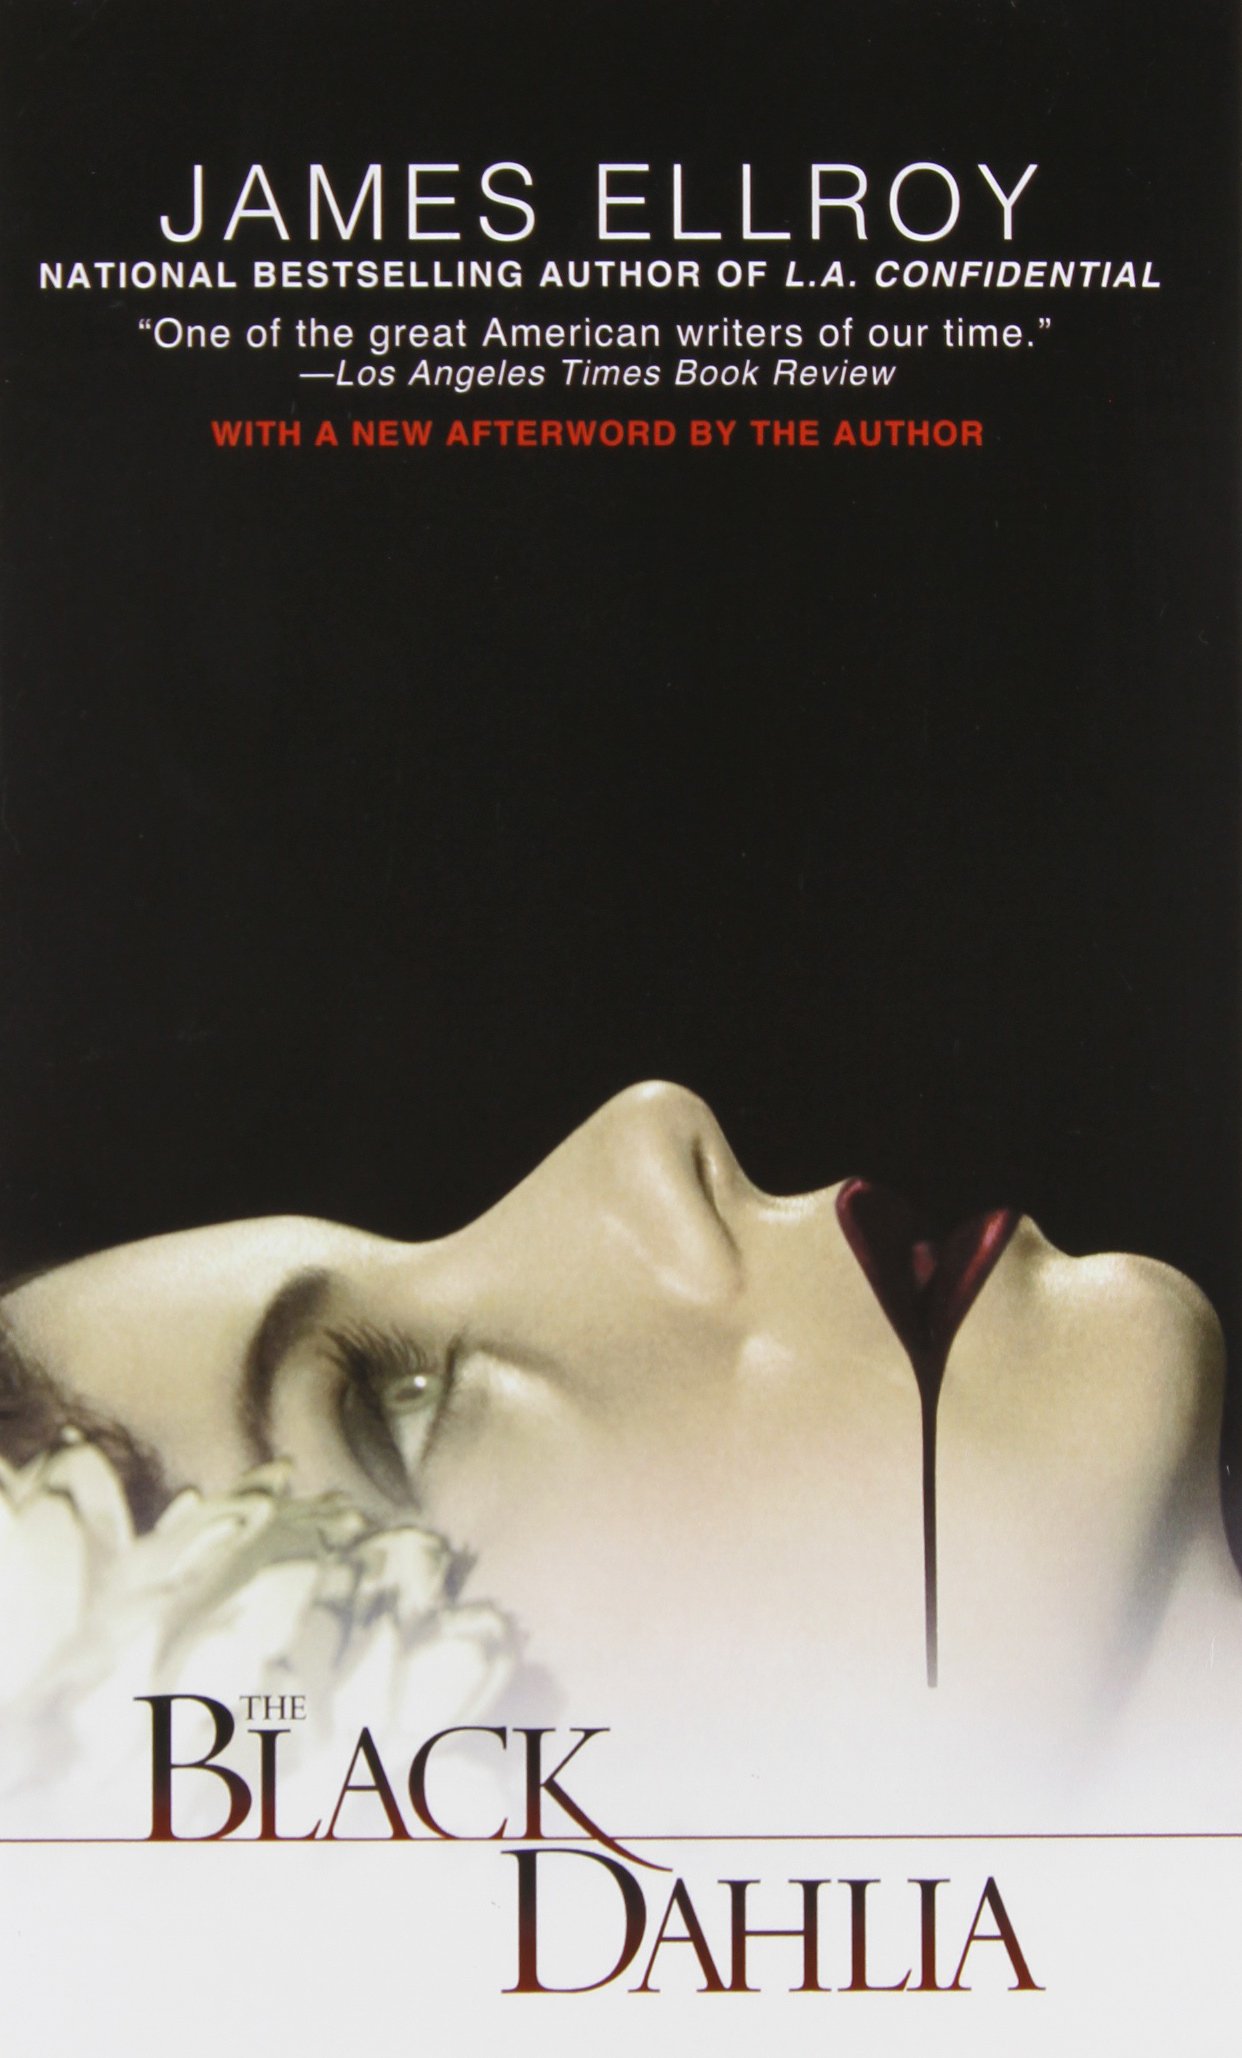 A dark and mysterious book cover for "the black dahlia" by james ellroy, featuring a black background with an enigmatic white flower and a drop of red, hinting at the novel's noir themes and chilling narrative.